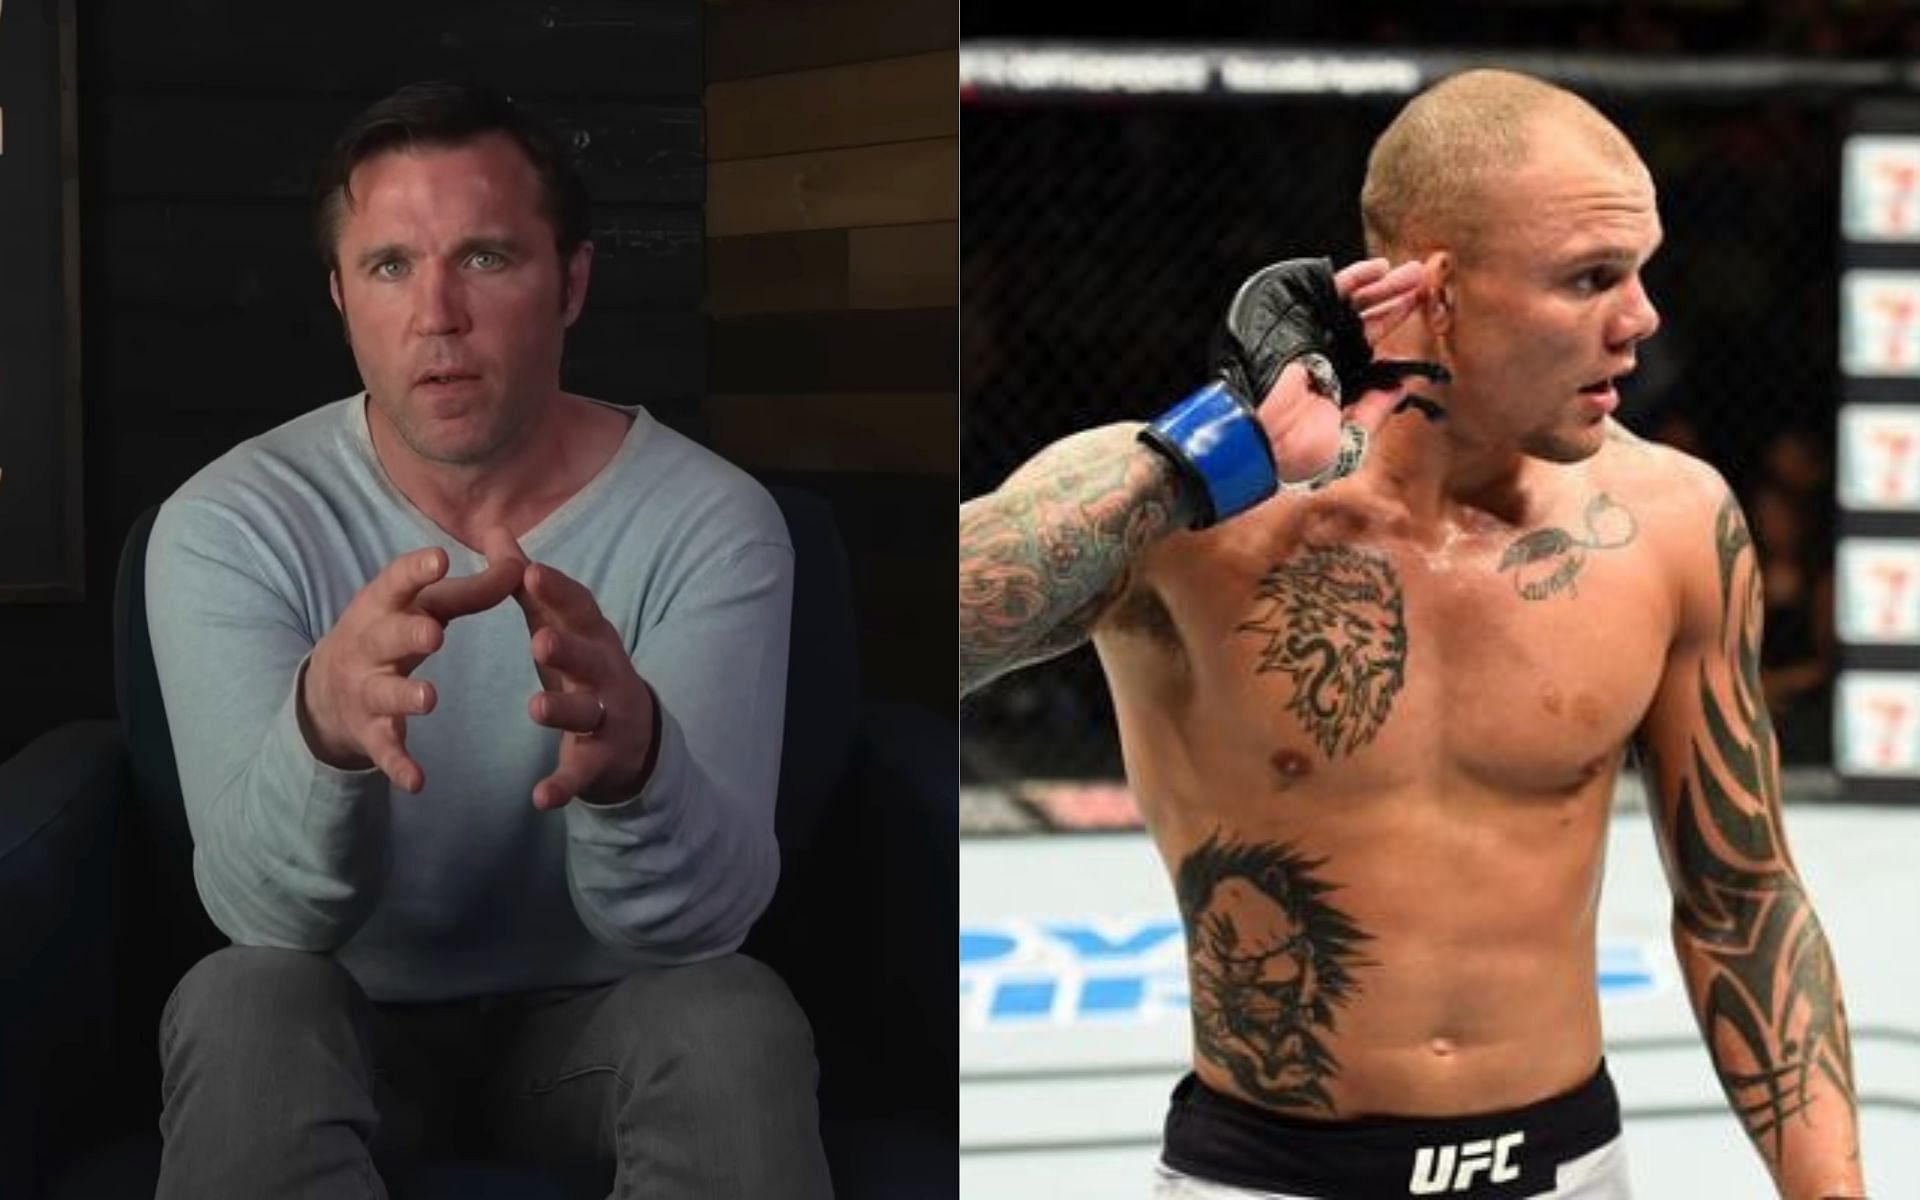 Chael Sonnen (left), Anthony Smith (right) [Images courtesy: Chael Sonnen via YouTube and @lionheartasmith via Instagram]